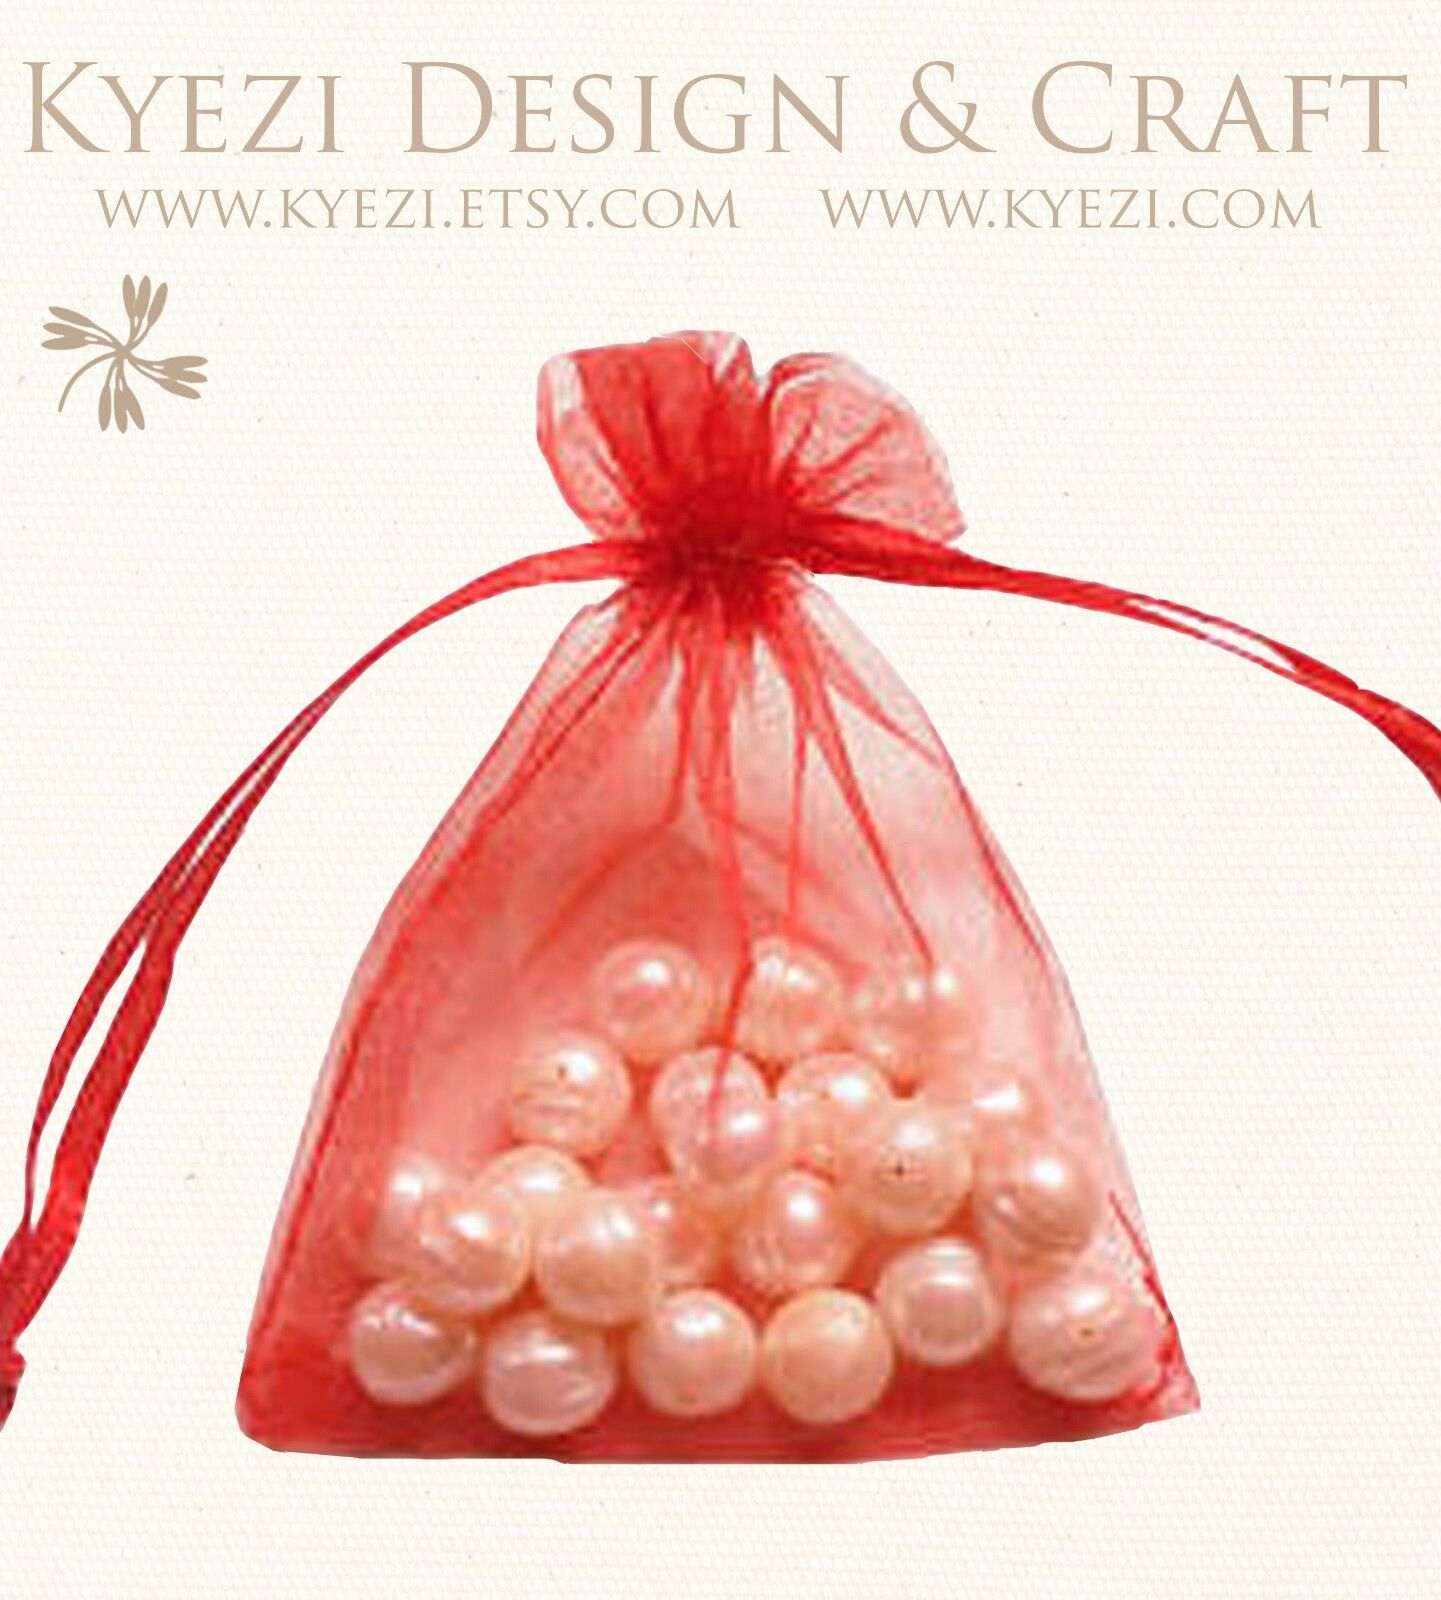 50/100/150/200 Drawstring Organza Bag Jewelry Pouch Wedding Party Favor Gift Bag Kyezi Design and Craft Does Not Apply - фотография #4